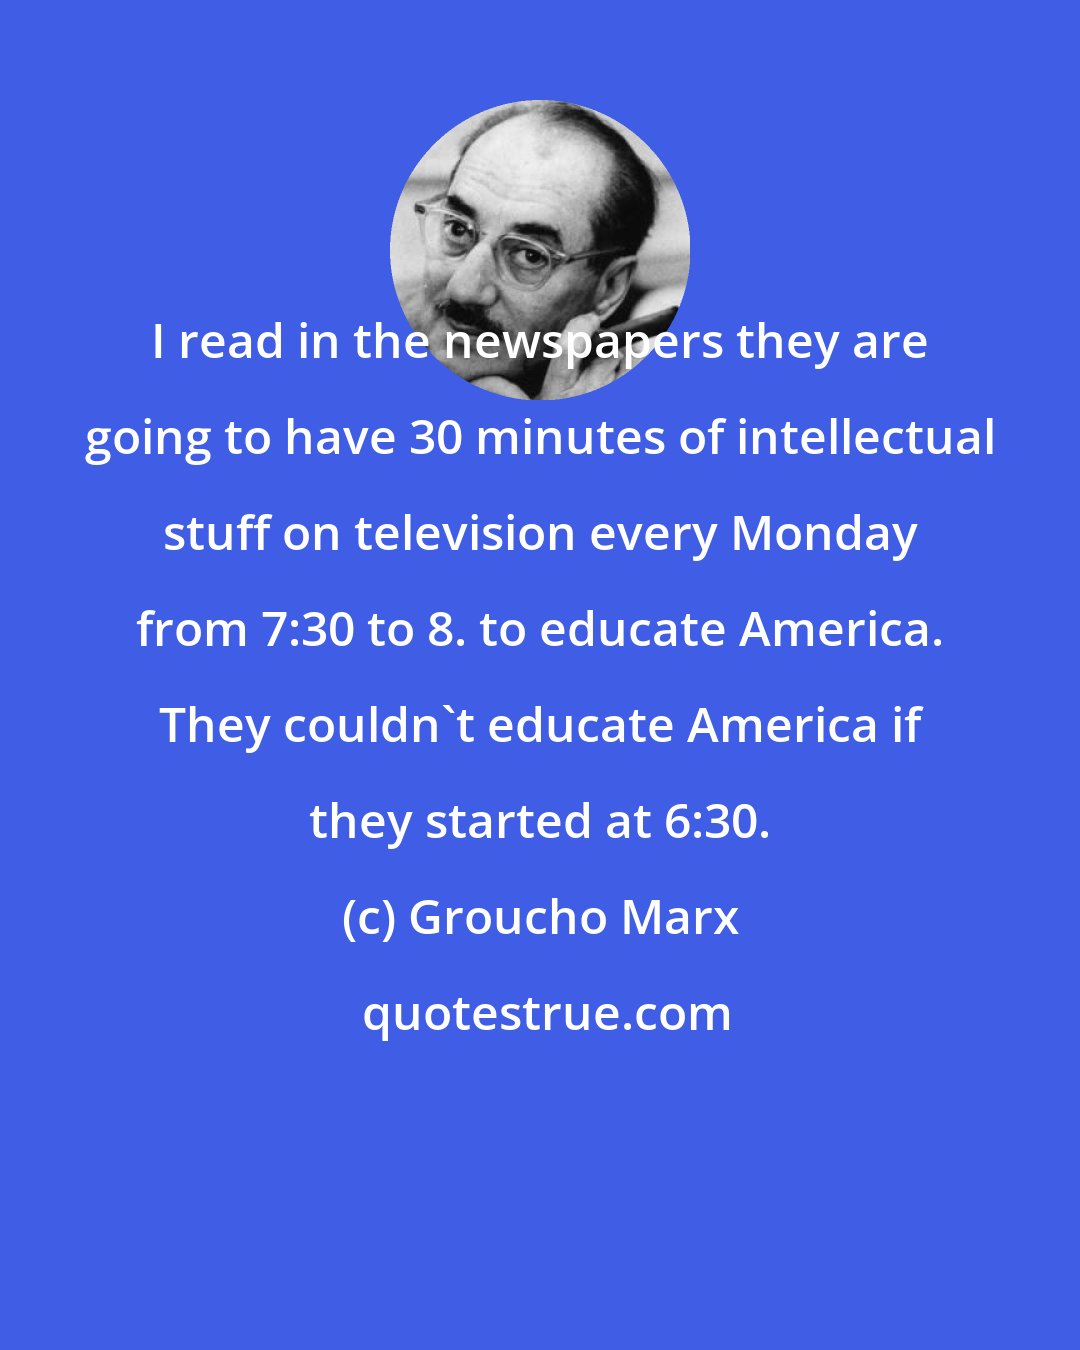 Groucho Marx: I read in the newspapers they are going to have 30 minutes of intellectual stuff on television every Monday from 7:30 to 8. to educate America. They couldn't educate America if they started at 6:30.